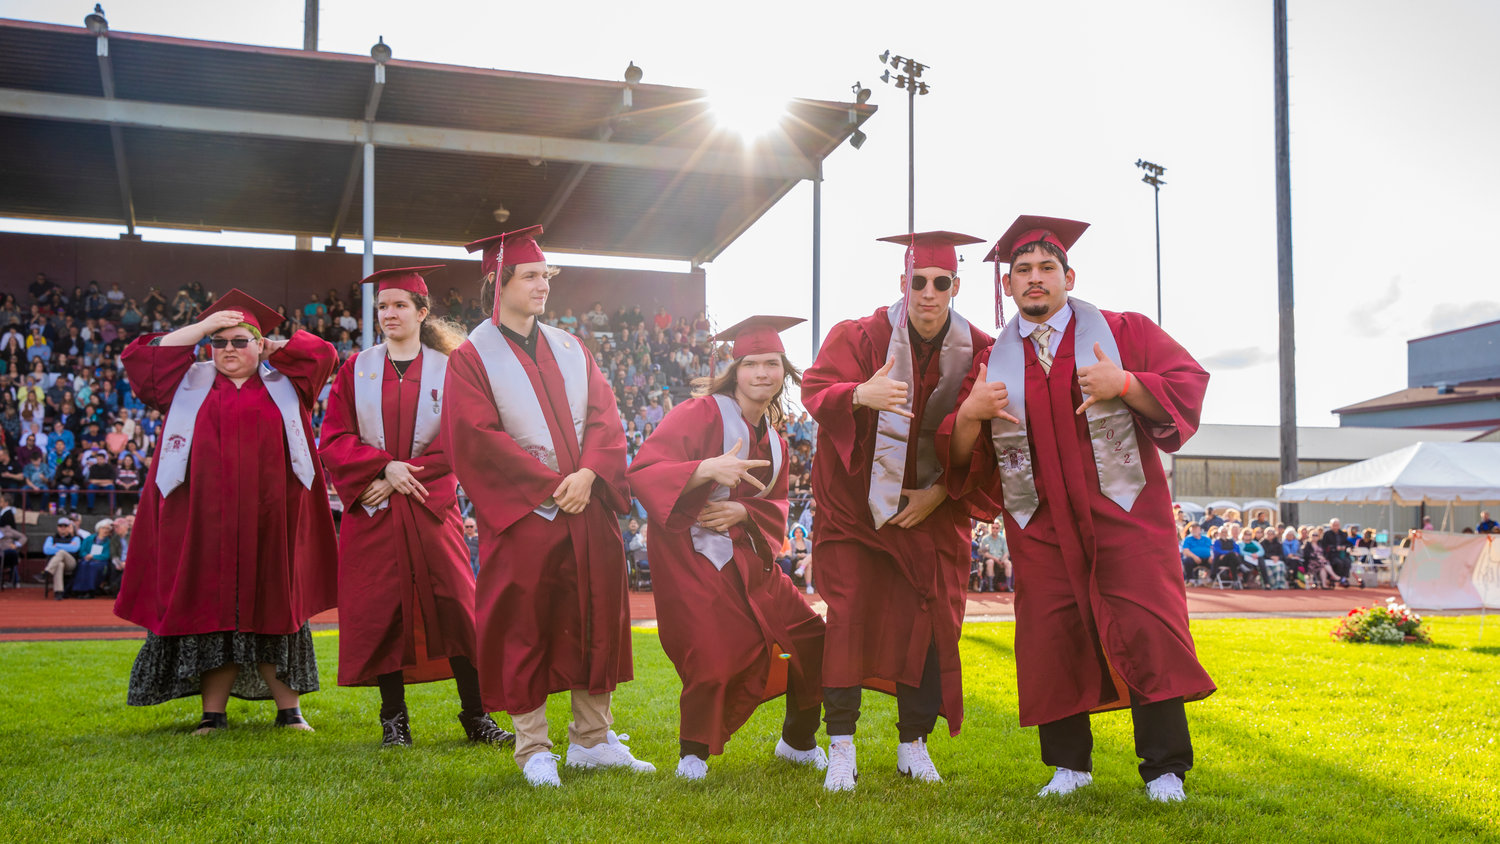 Graduates pose for a photo as they prepare to receive their diplomas Saturday outside W.F. West High School in Chehalis.